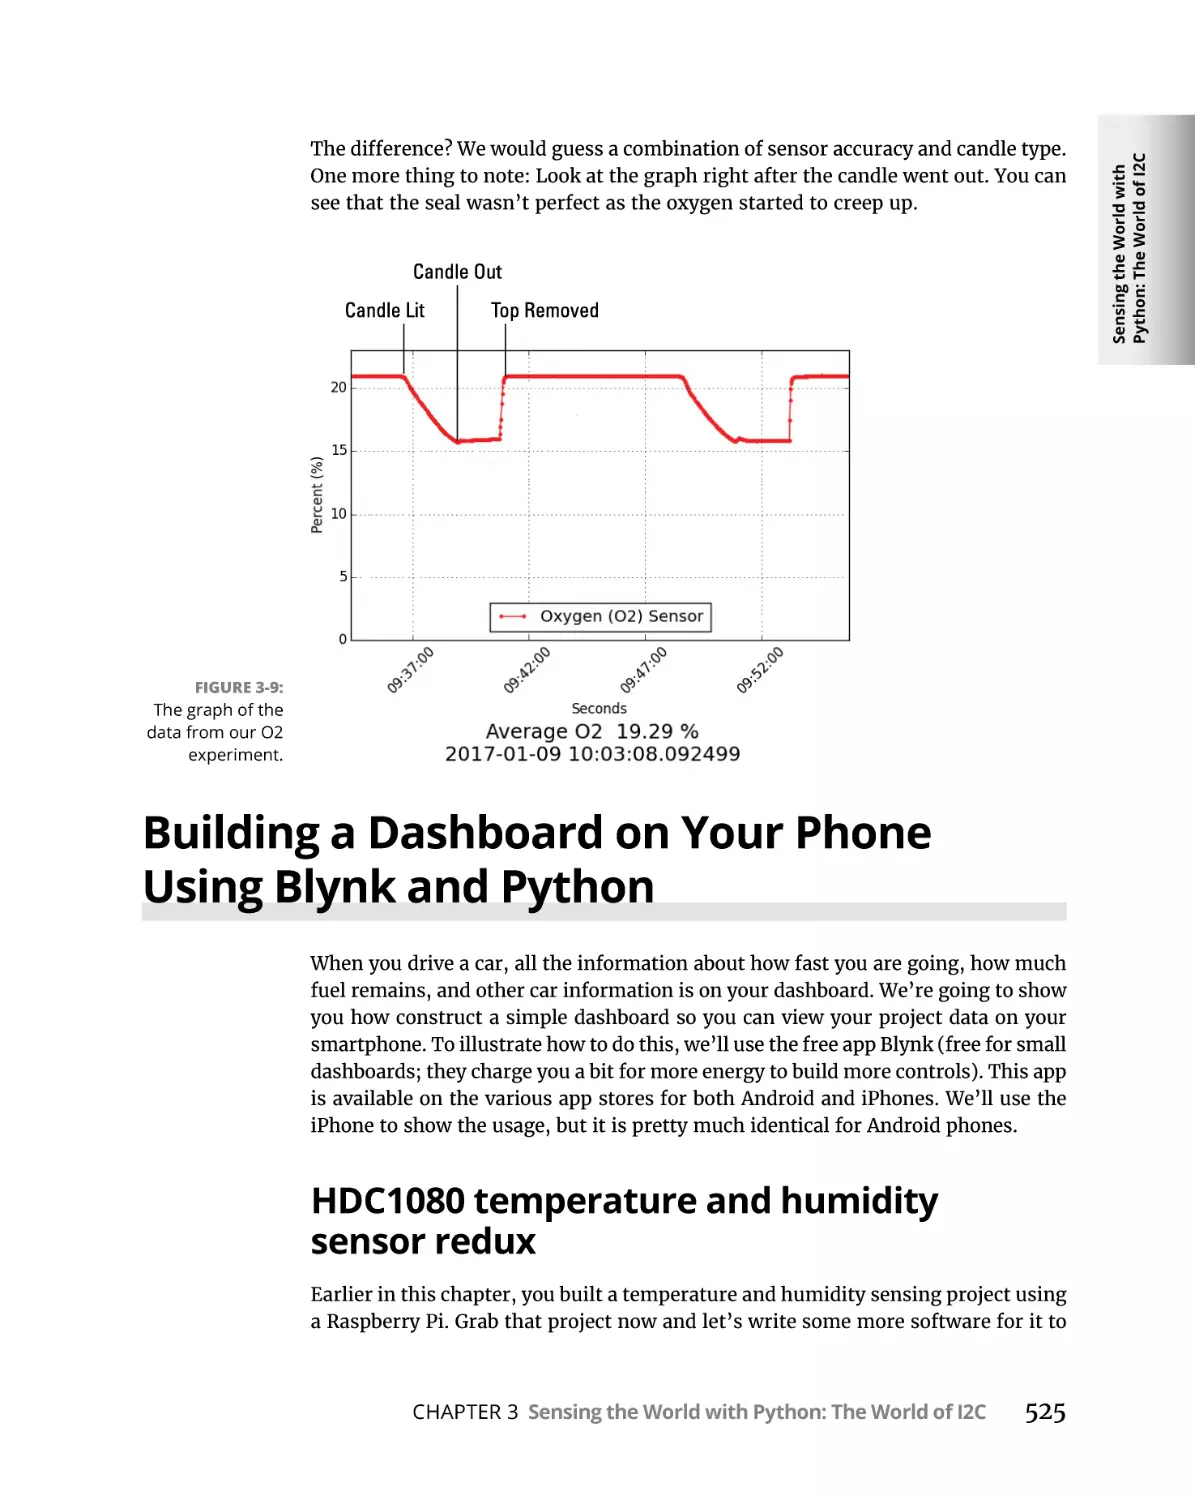 Building a Dashboard on Your Phone Using Blynk and Python
HDC1080 temperature and humidity sensor redux